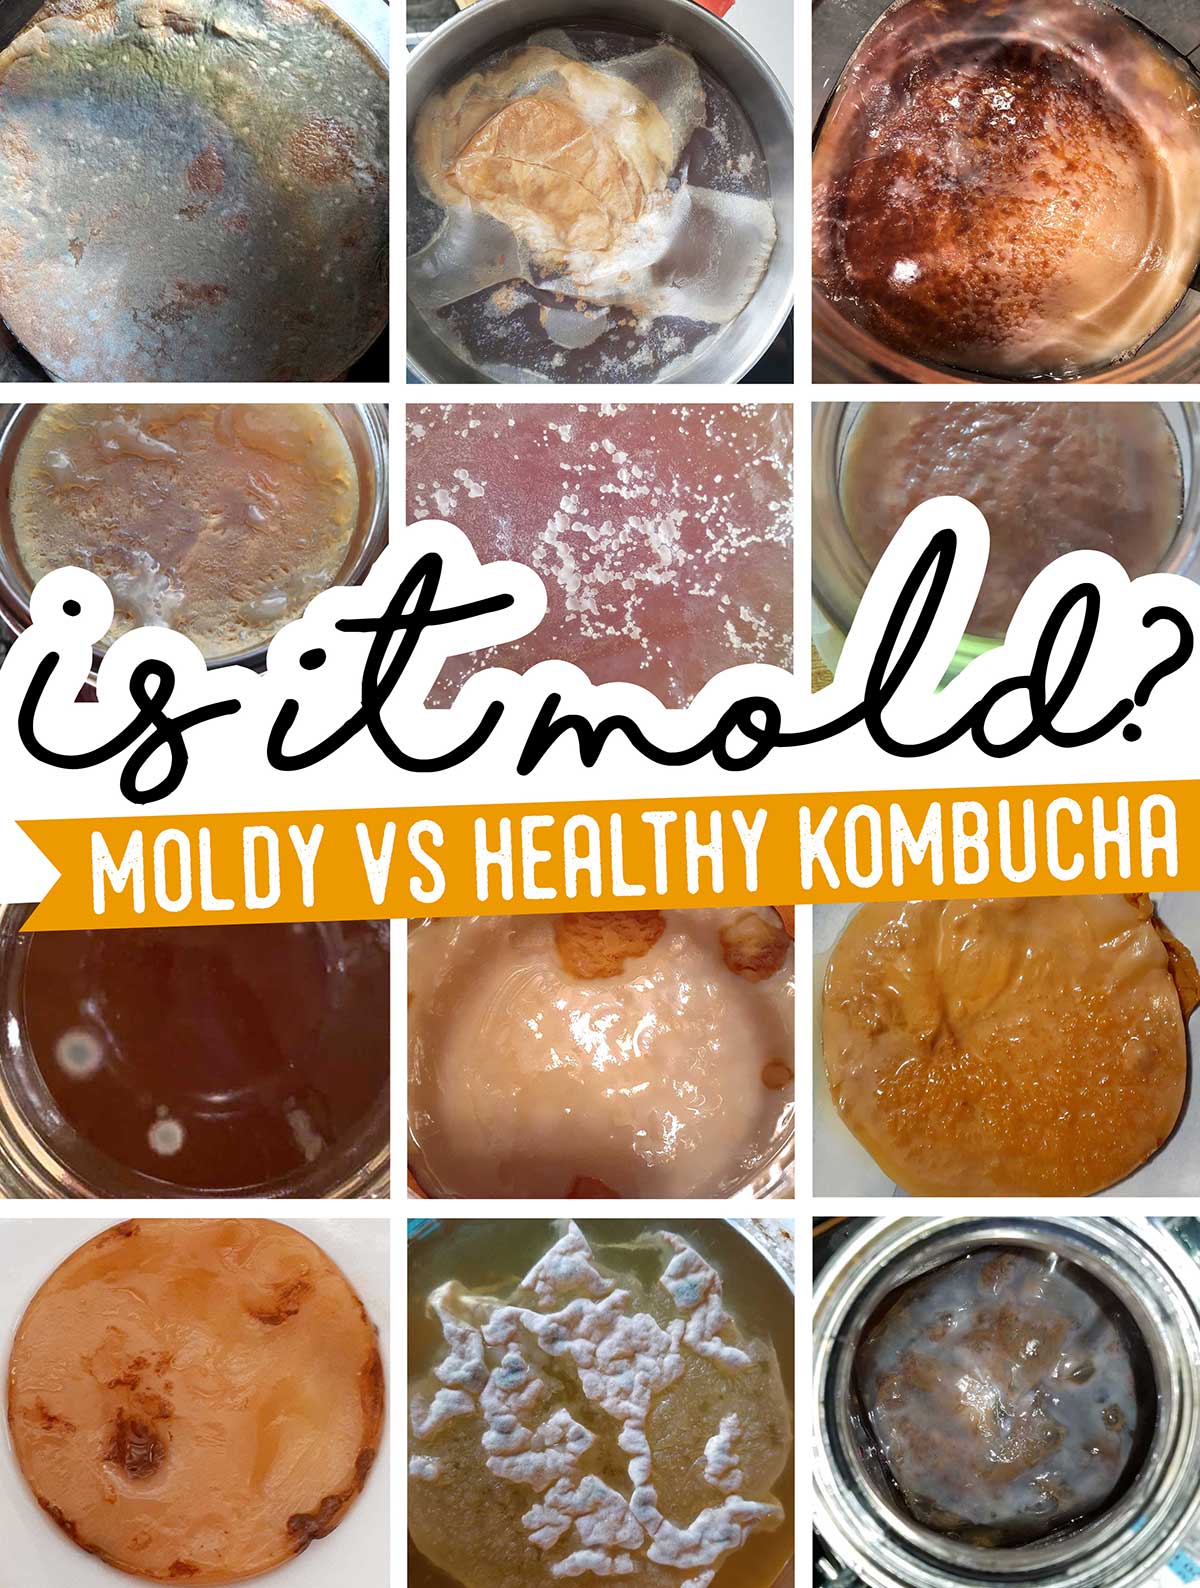 Picture of kombucha SCOBYs with and without mold